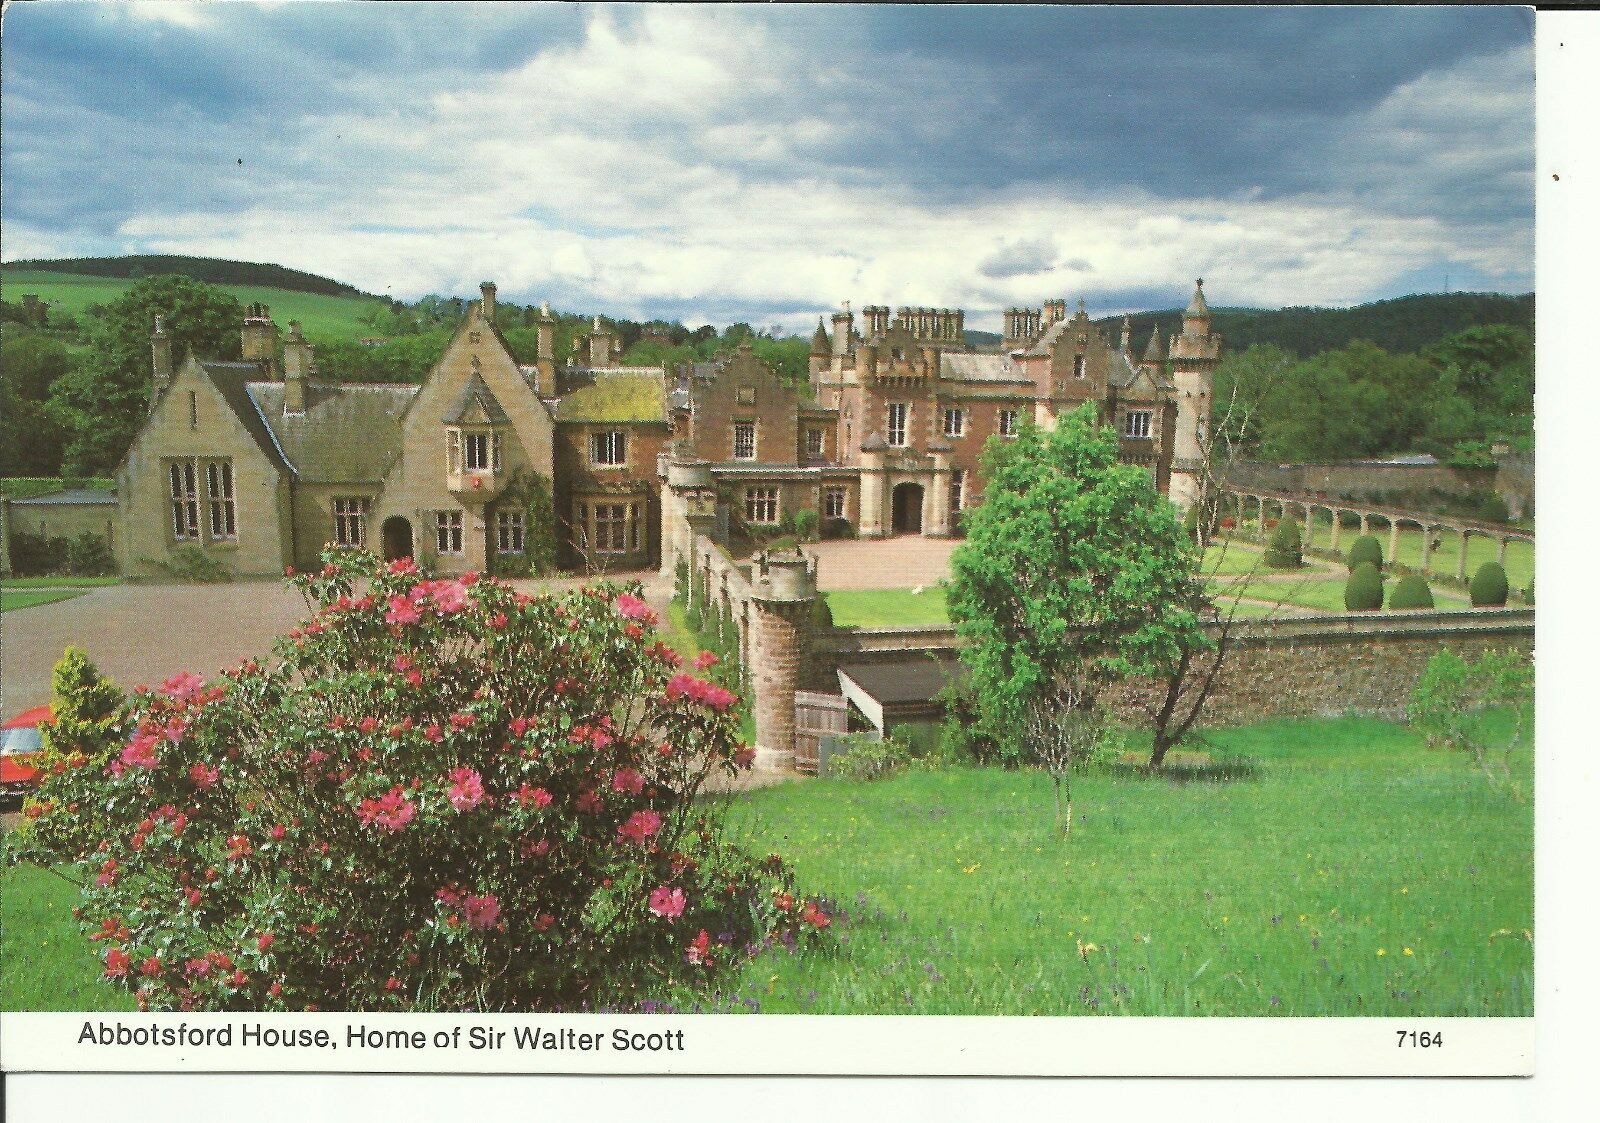 House Clearance - Abbotsford House , Home of Sir Walter Scott, Melrose , Roxburghshire